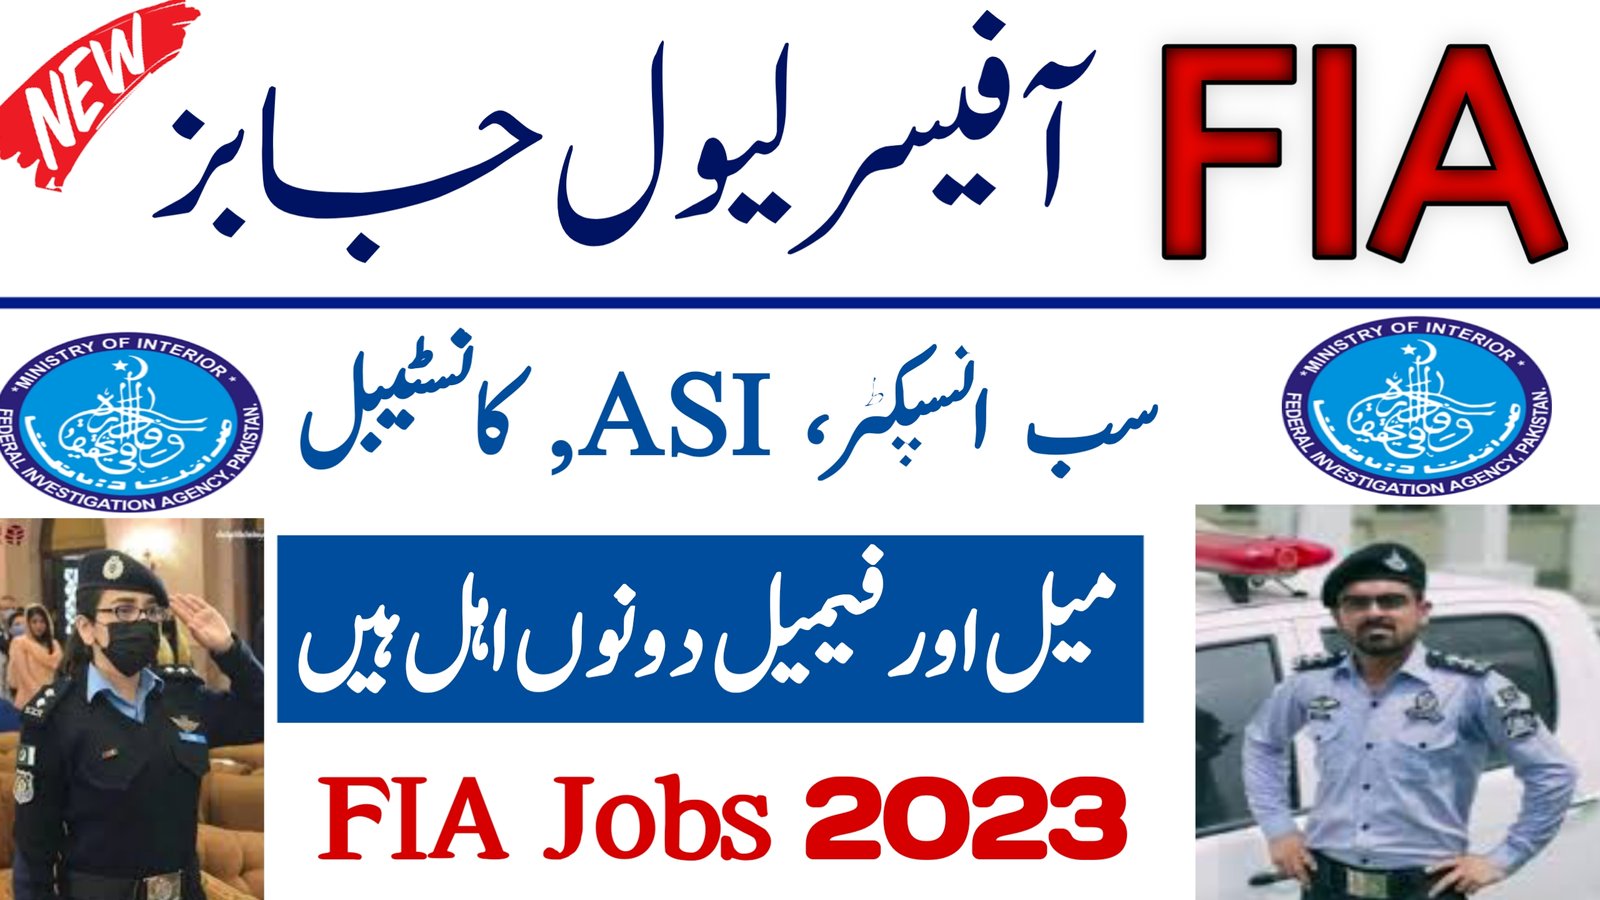 How to Become Inspector and ASI in FIA for Males and Females